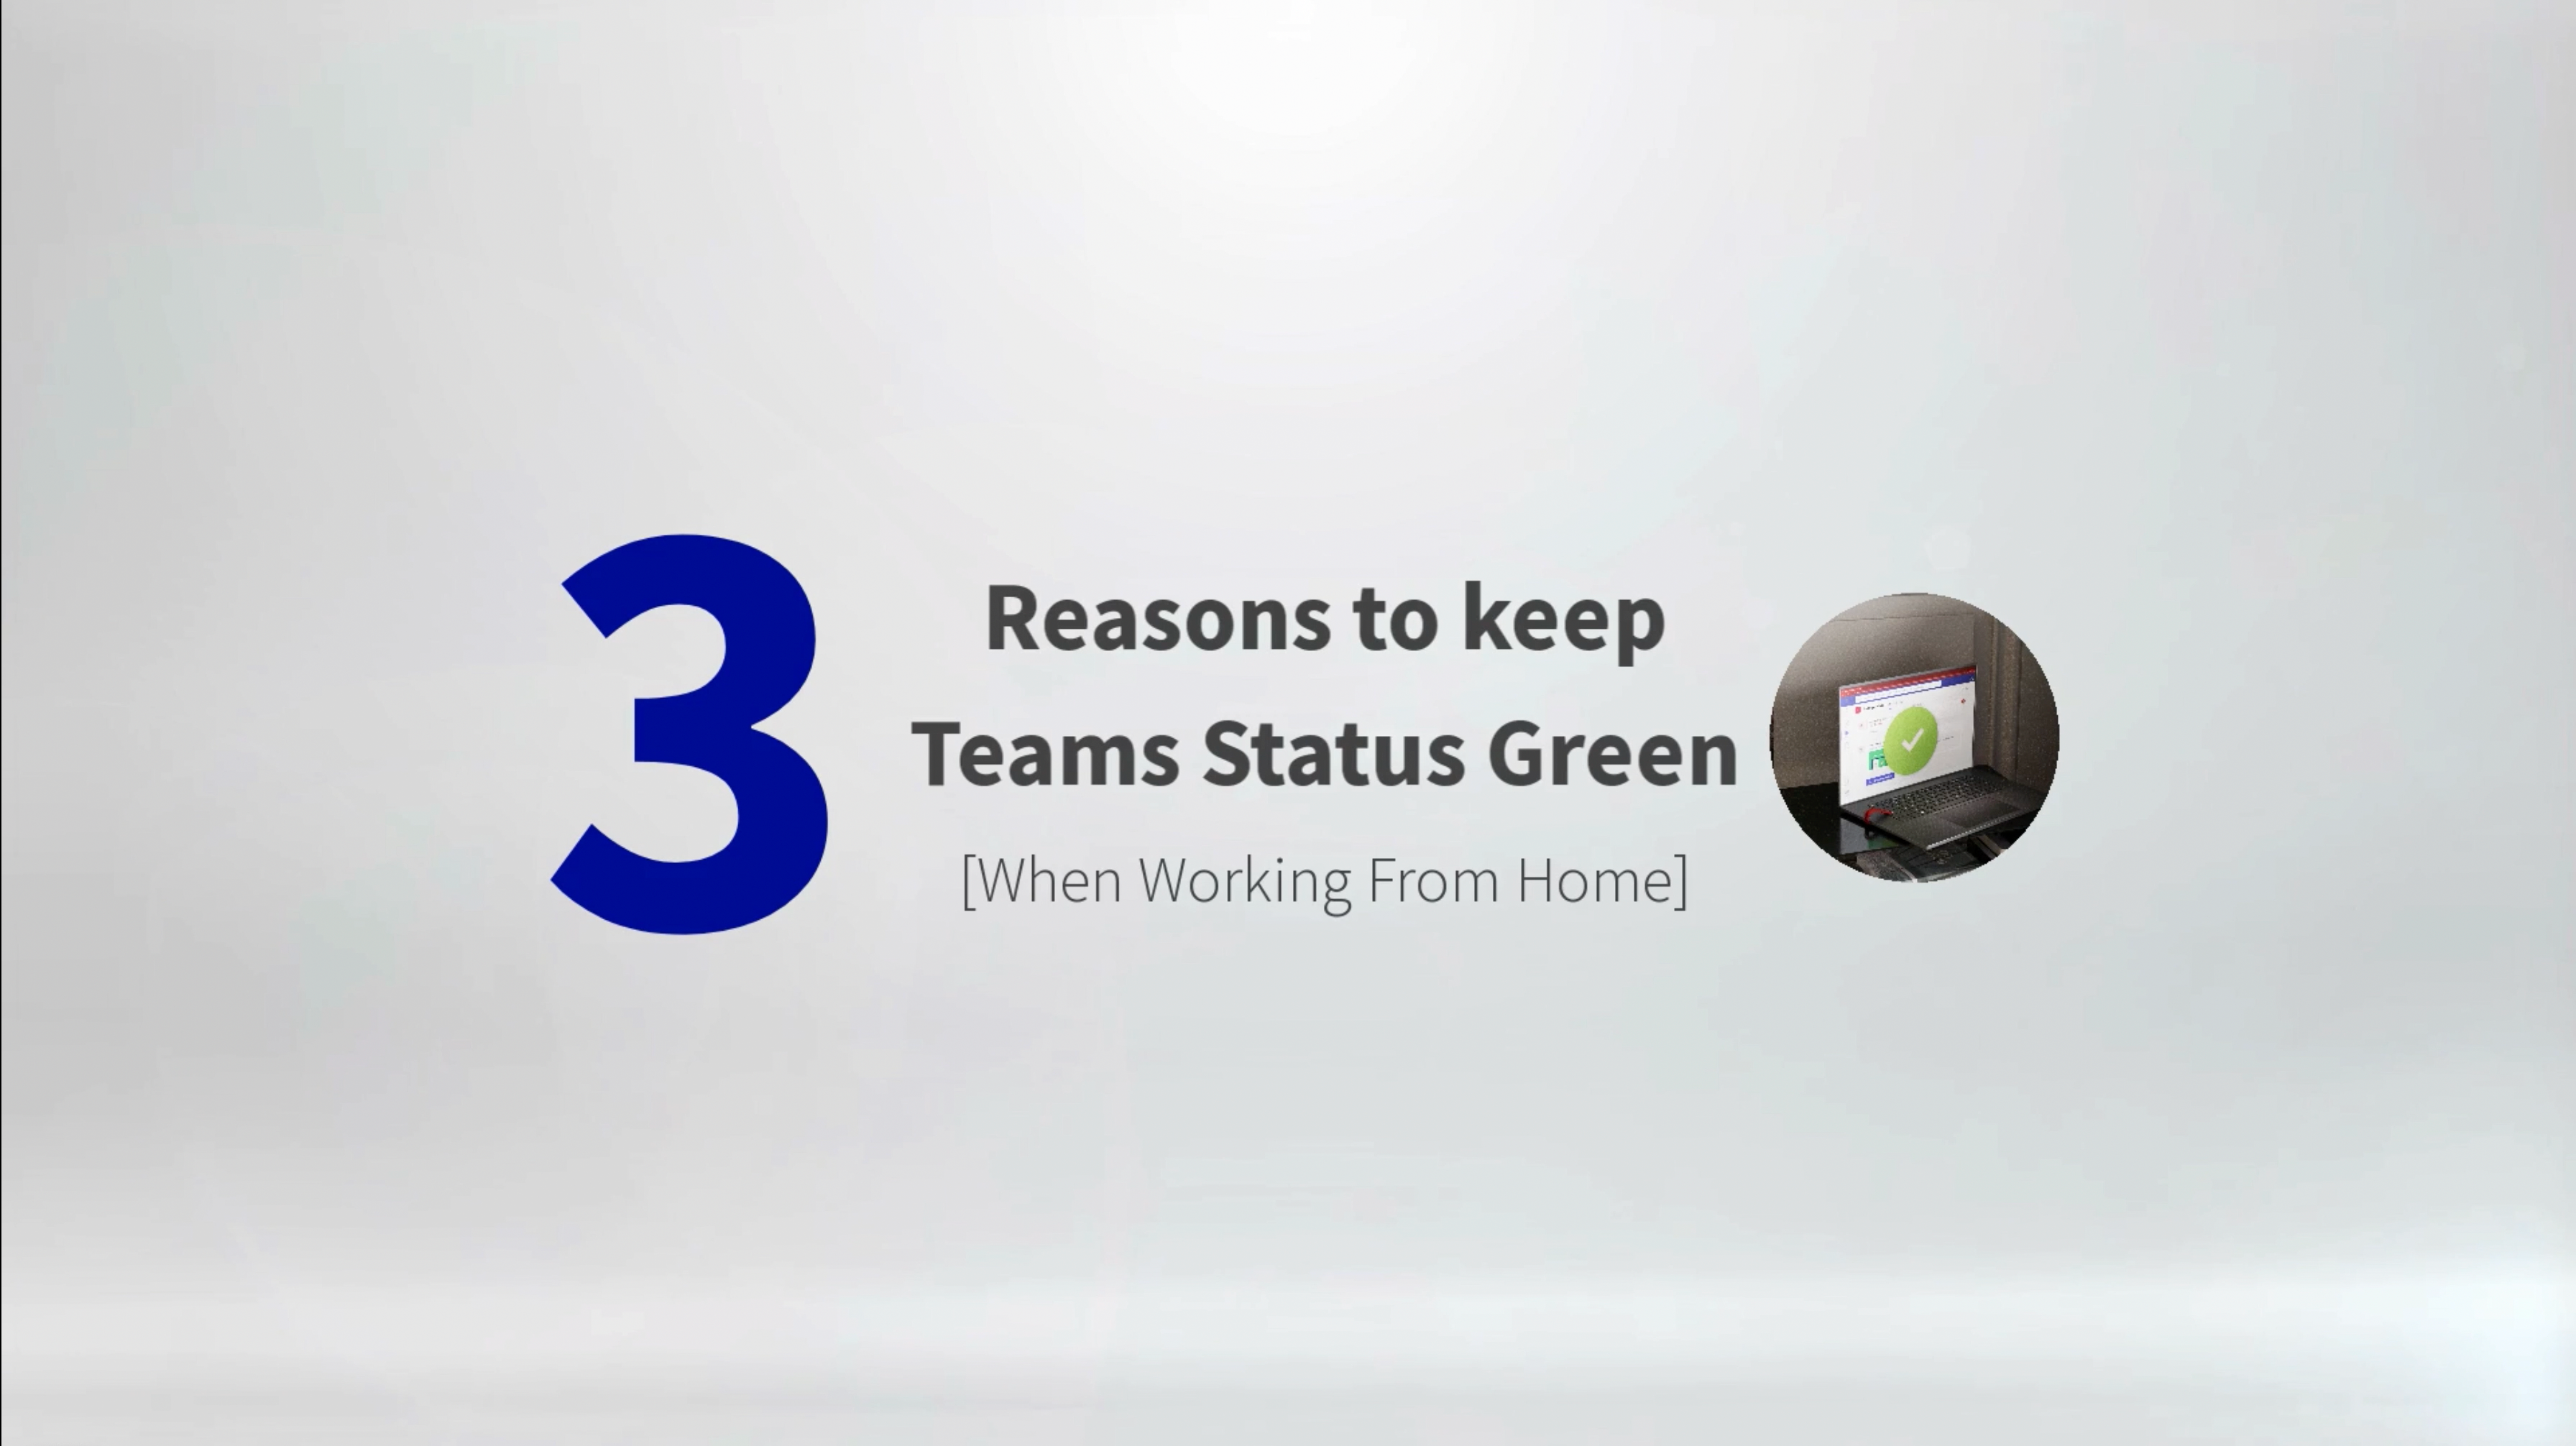 Load video: Three Reasons To Keep Teams Status Green. 1. Privacy 2. Productivity 3. Freedom.